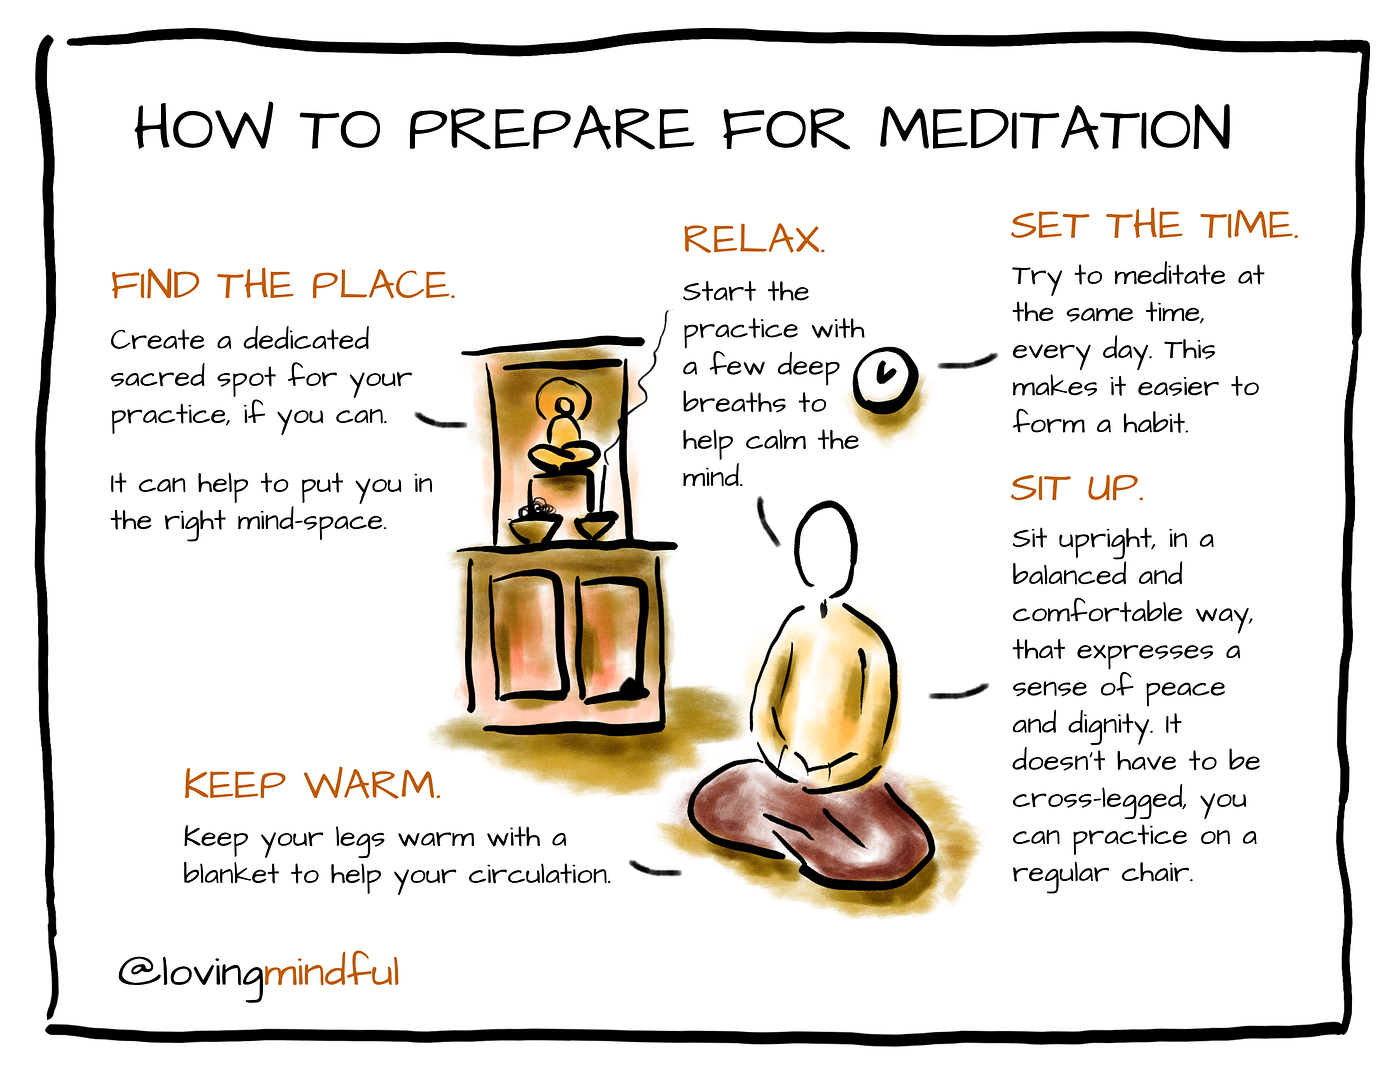 This is how you should prepare for sitting meditation practice, by John  Szabo, Loving Mindful